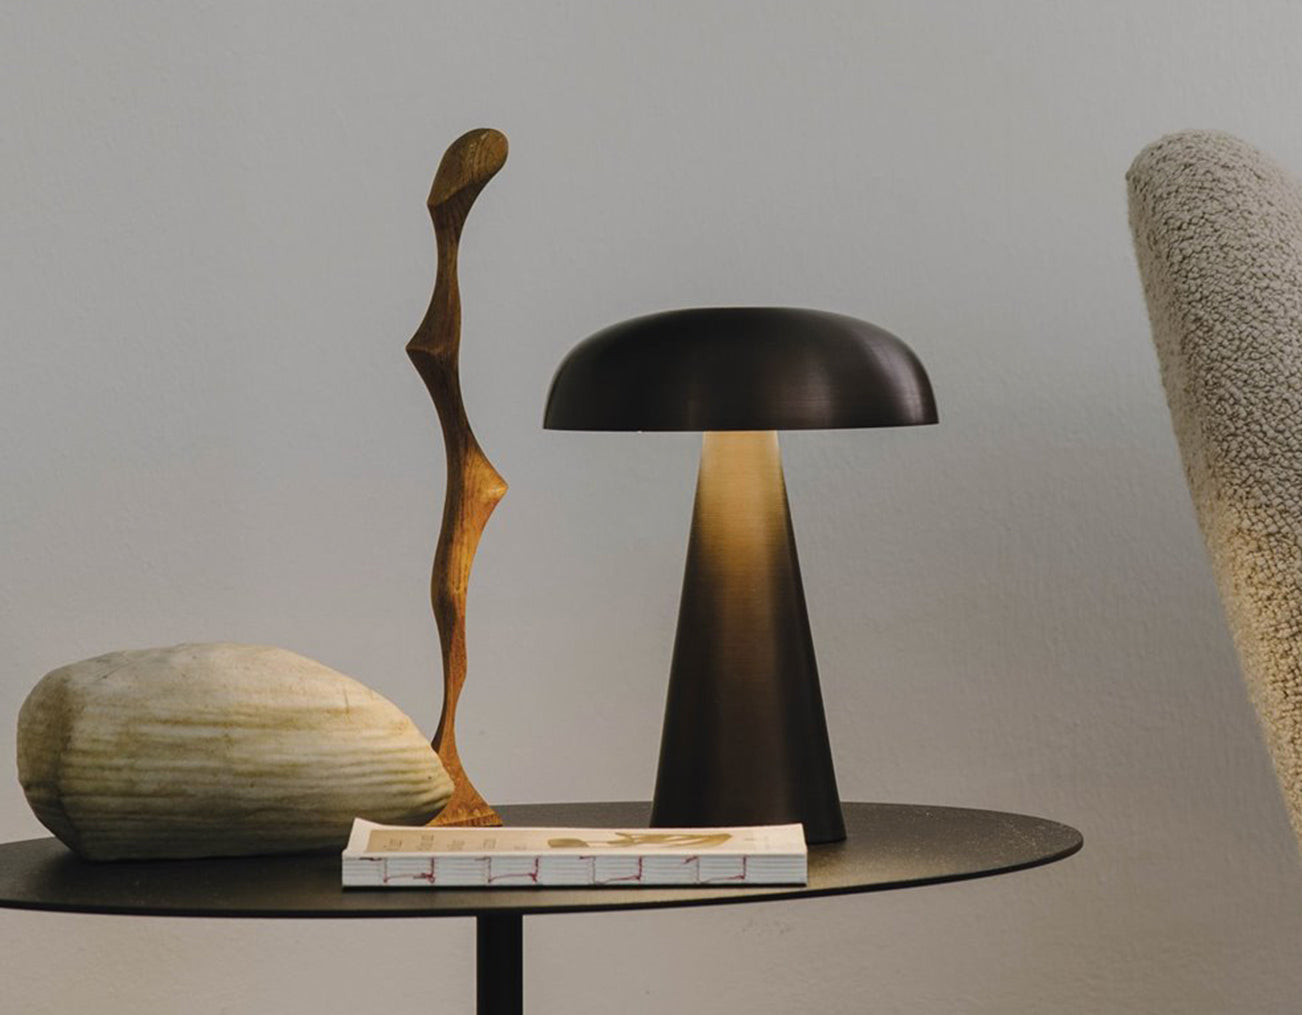 6 ICONIC TABLE LAMPS THAT MADE HISTORY